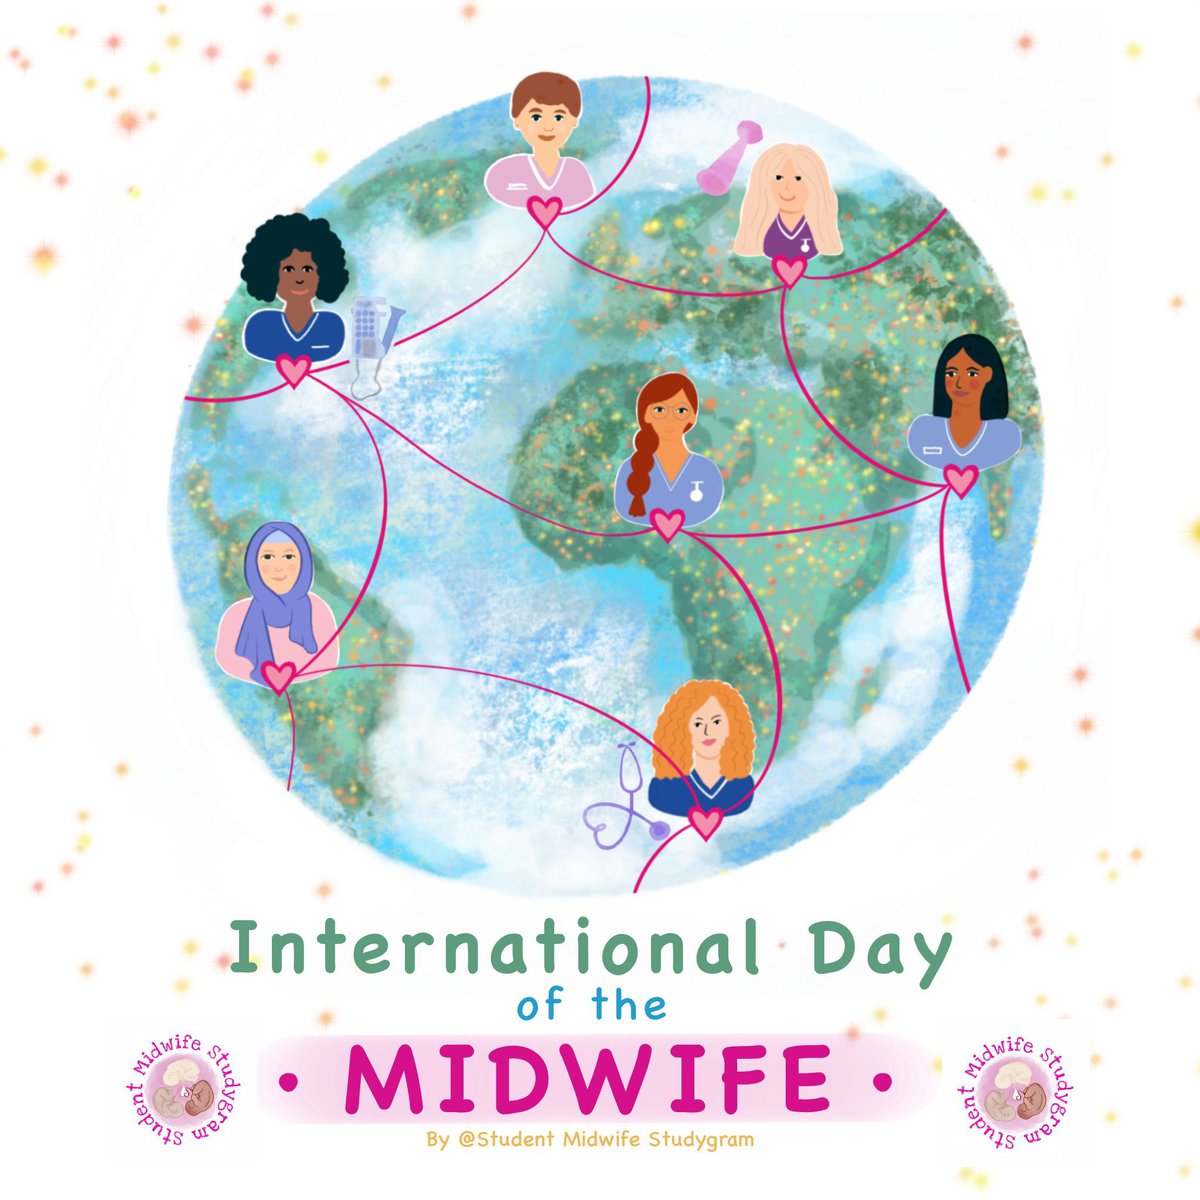 ✨💖🩺👩🏾‍⚕️Happy International Day of the Midwife! 👩🏼‍⚕️🩺💖✨

Thank you for all you do!

#midwife #midwifery #maternity #studentmidwife #midwifelife #midwives #studentlife #midwiferycare #midwiferystudent #midwiferysociety #idm #idm2024